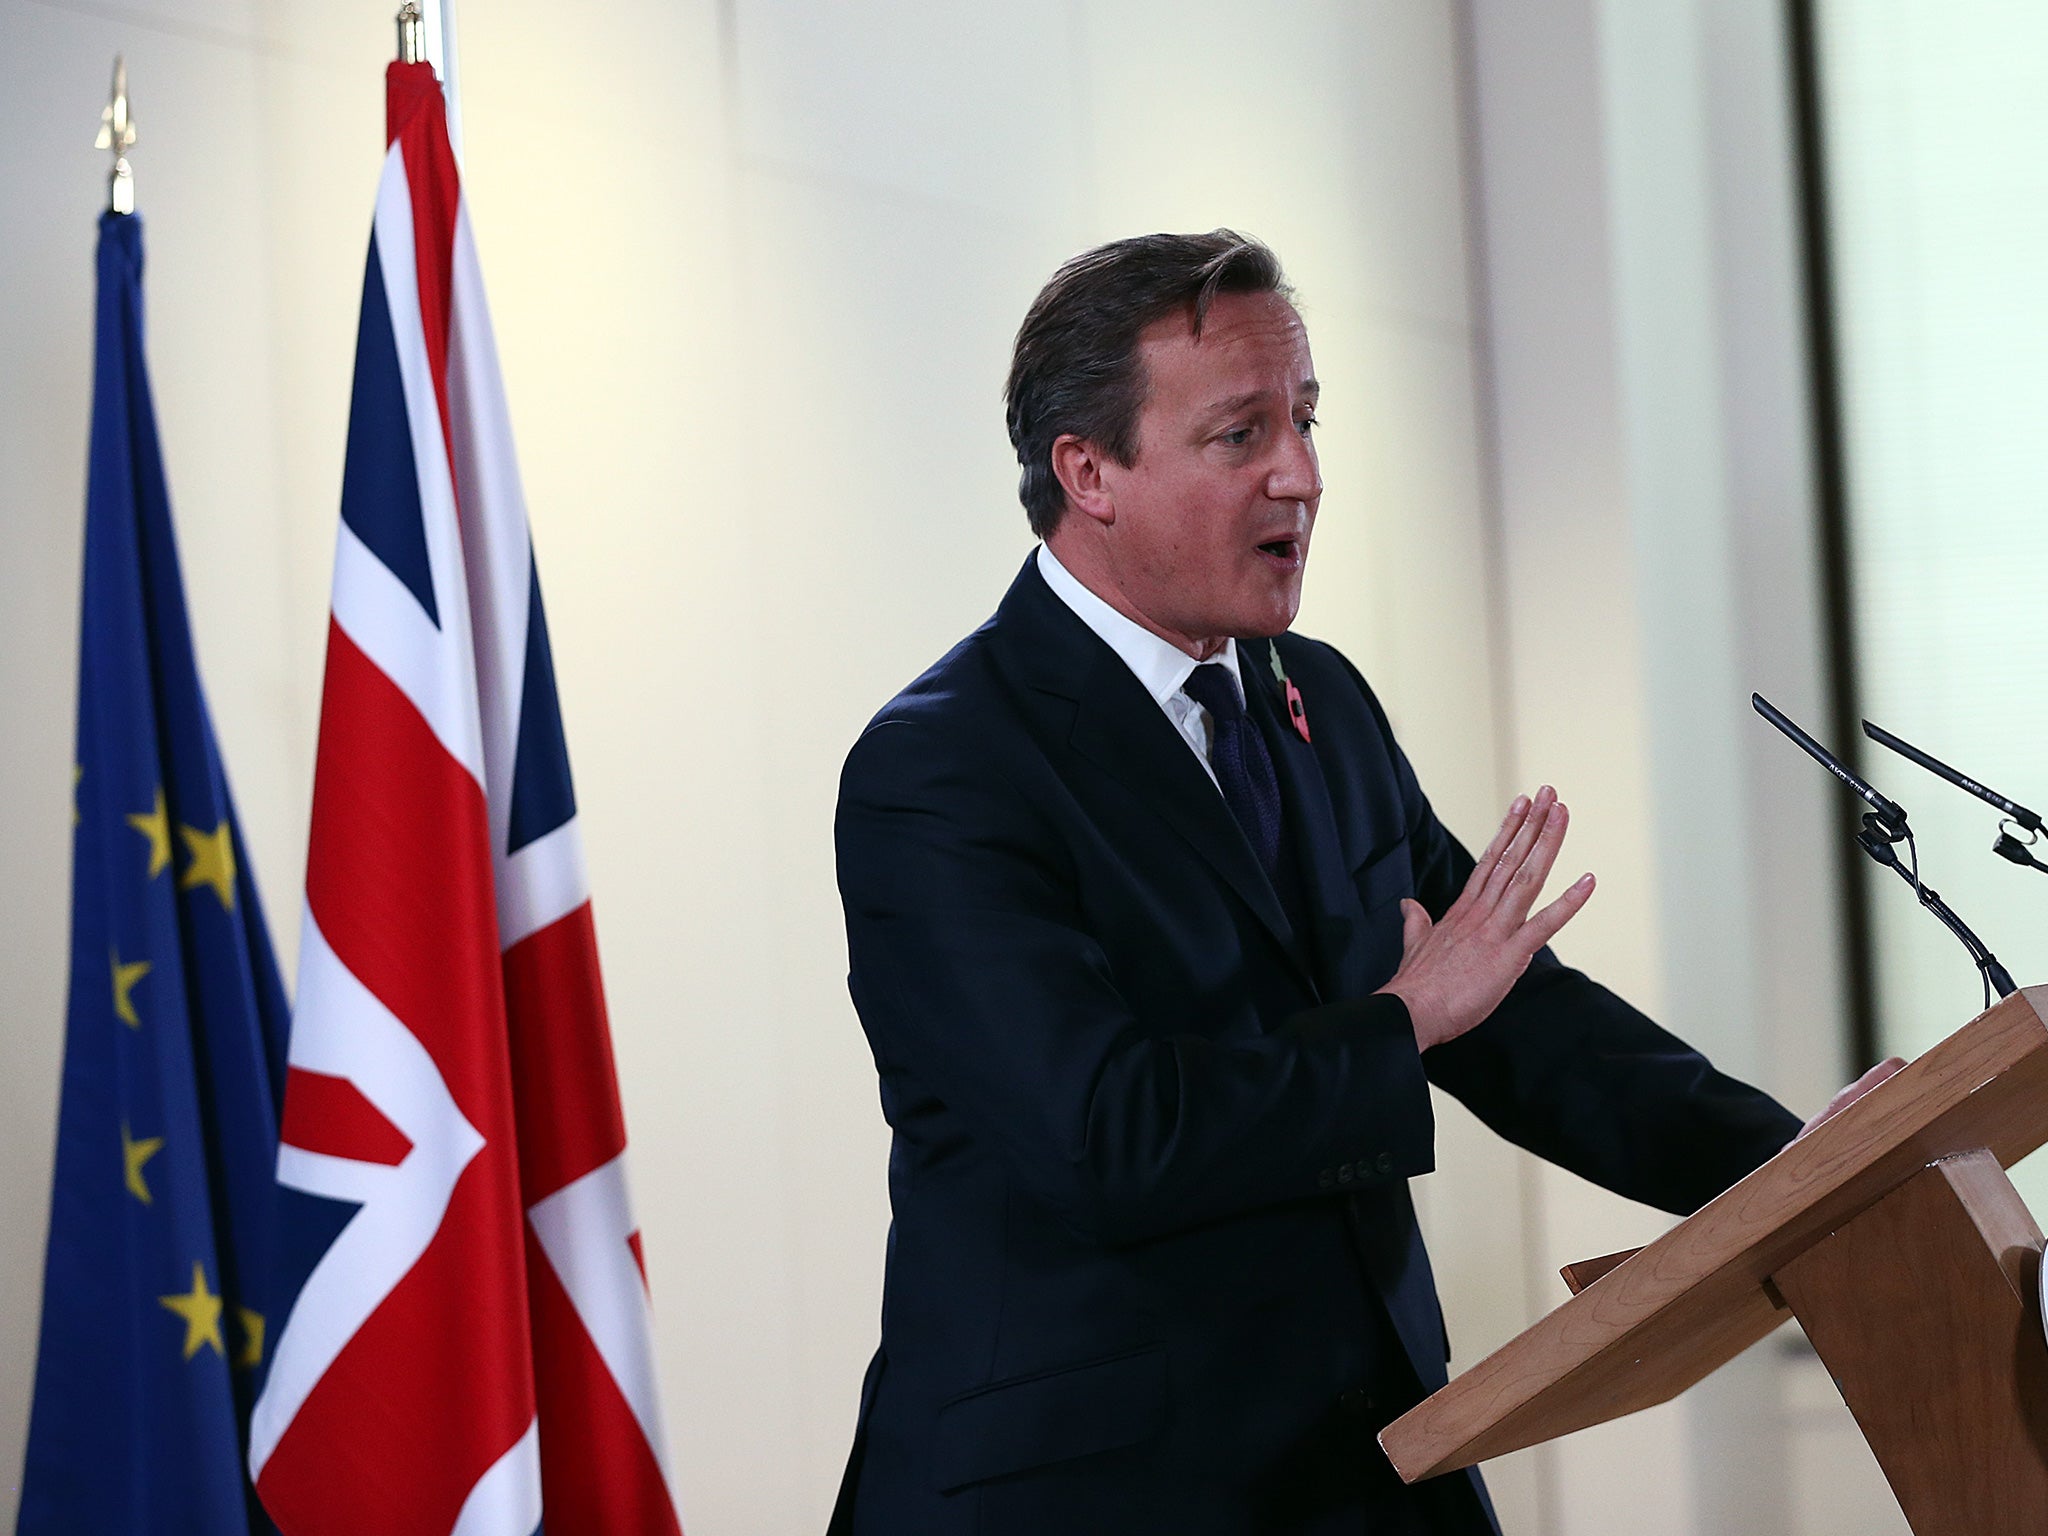 David Cameron is set to try and renegotiate the terms of Britain's position within the EU